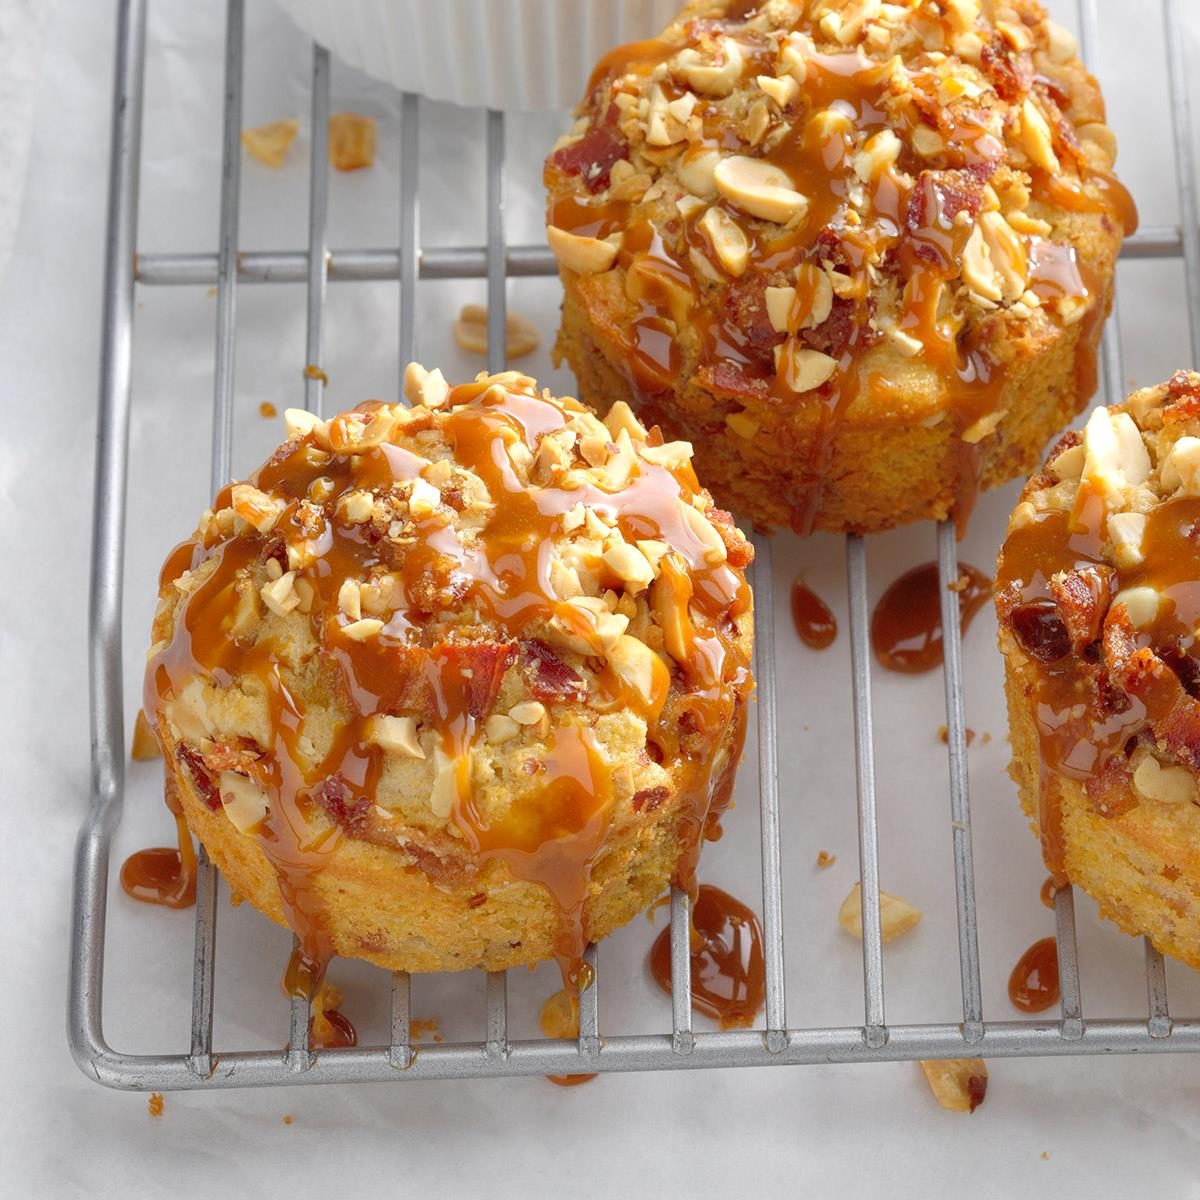 Bacon Peanut Butter Cornbread Baby Cakes Exps Tohfm20 238321 B09 19 11b 17